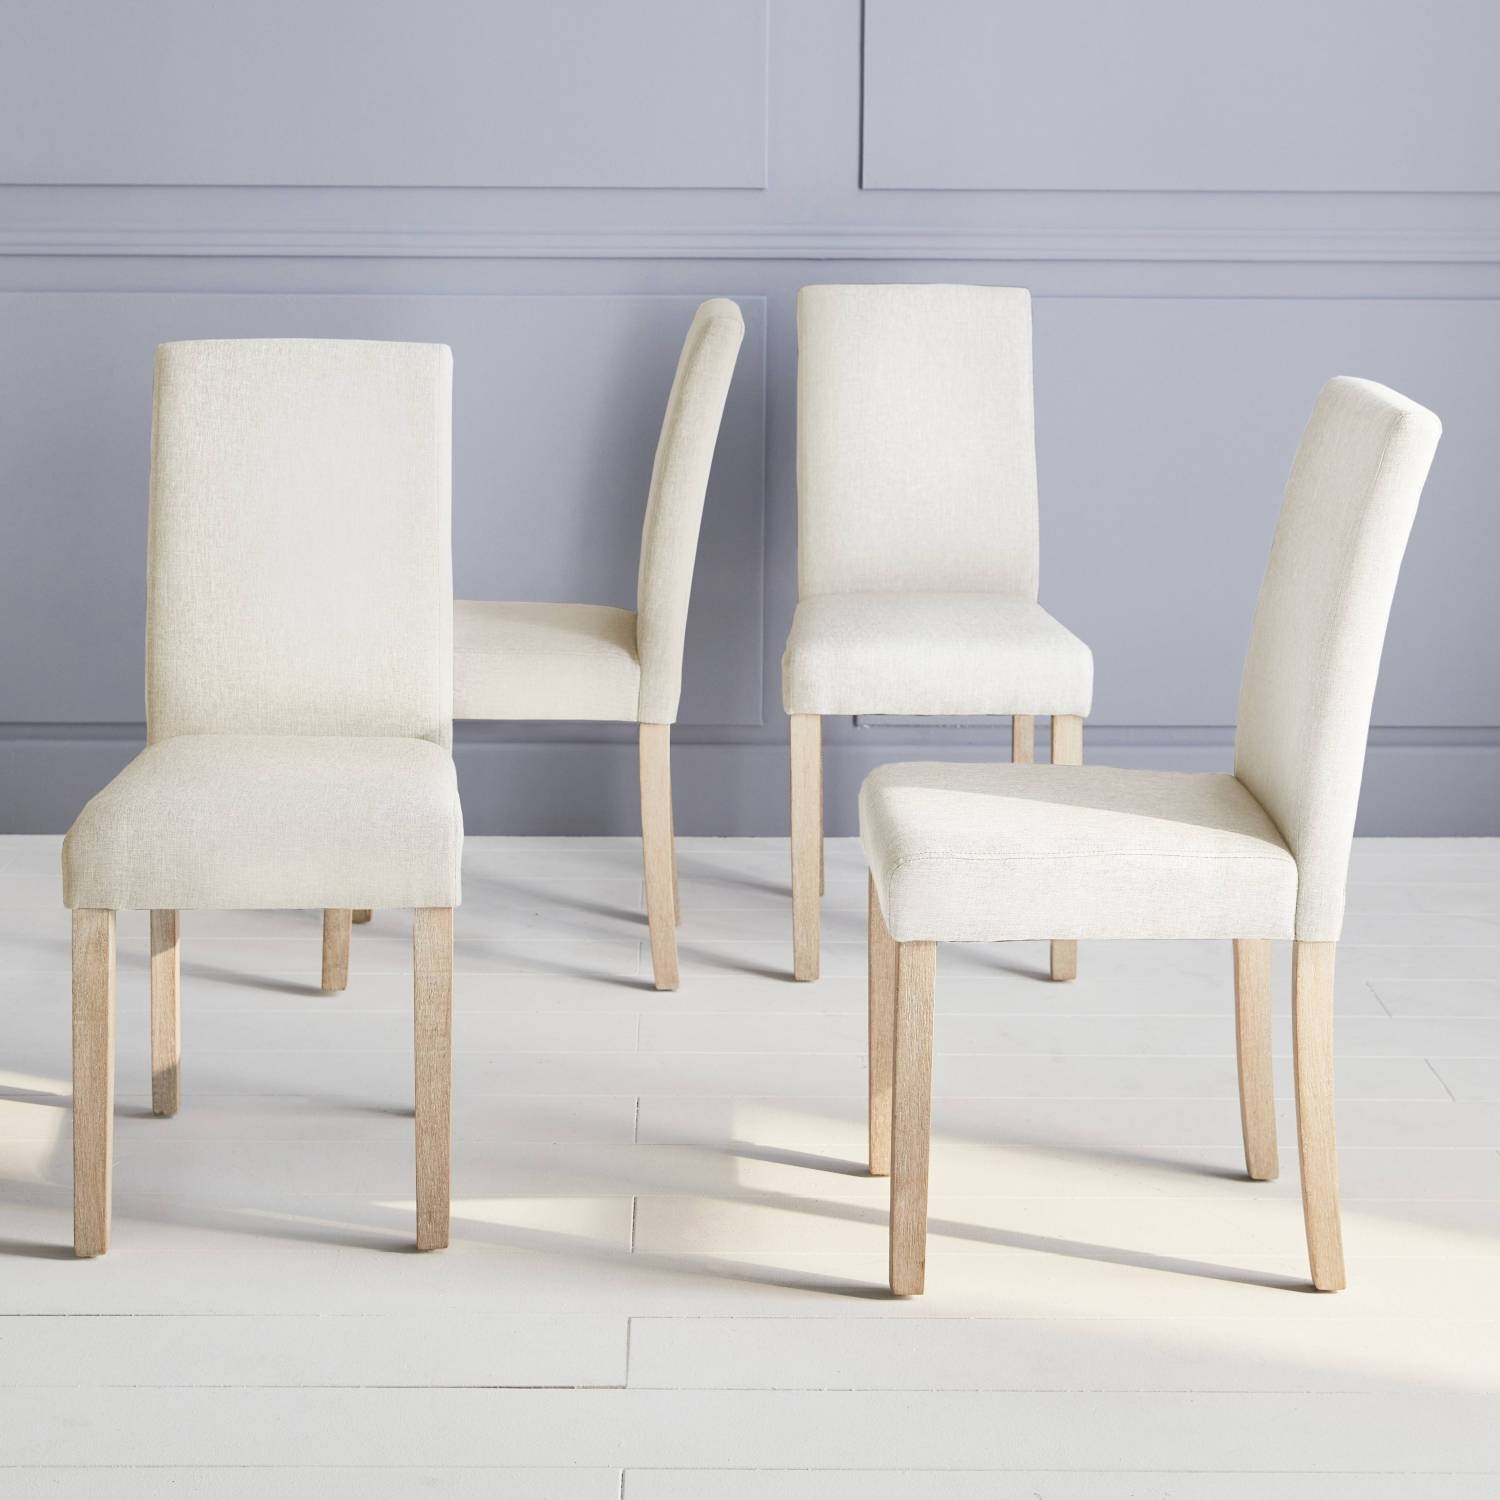 Set of 4 fabric dining chairs with wooden legs, Beige | sweeek